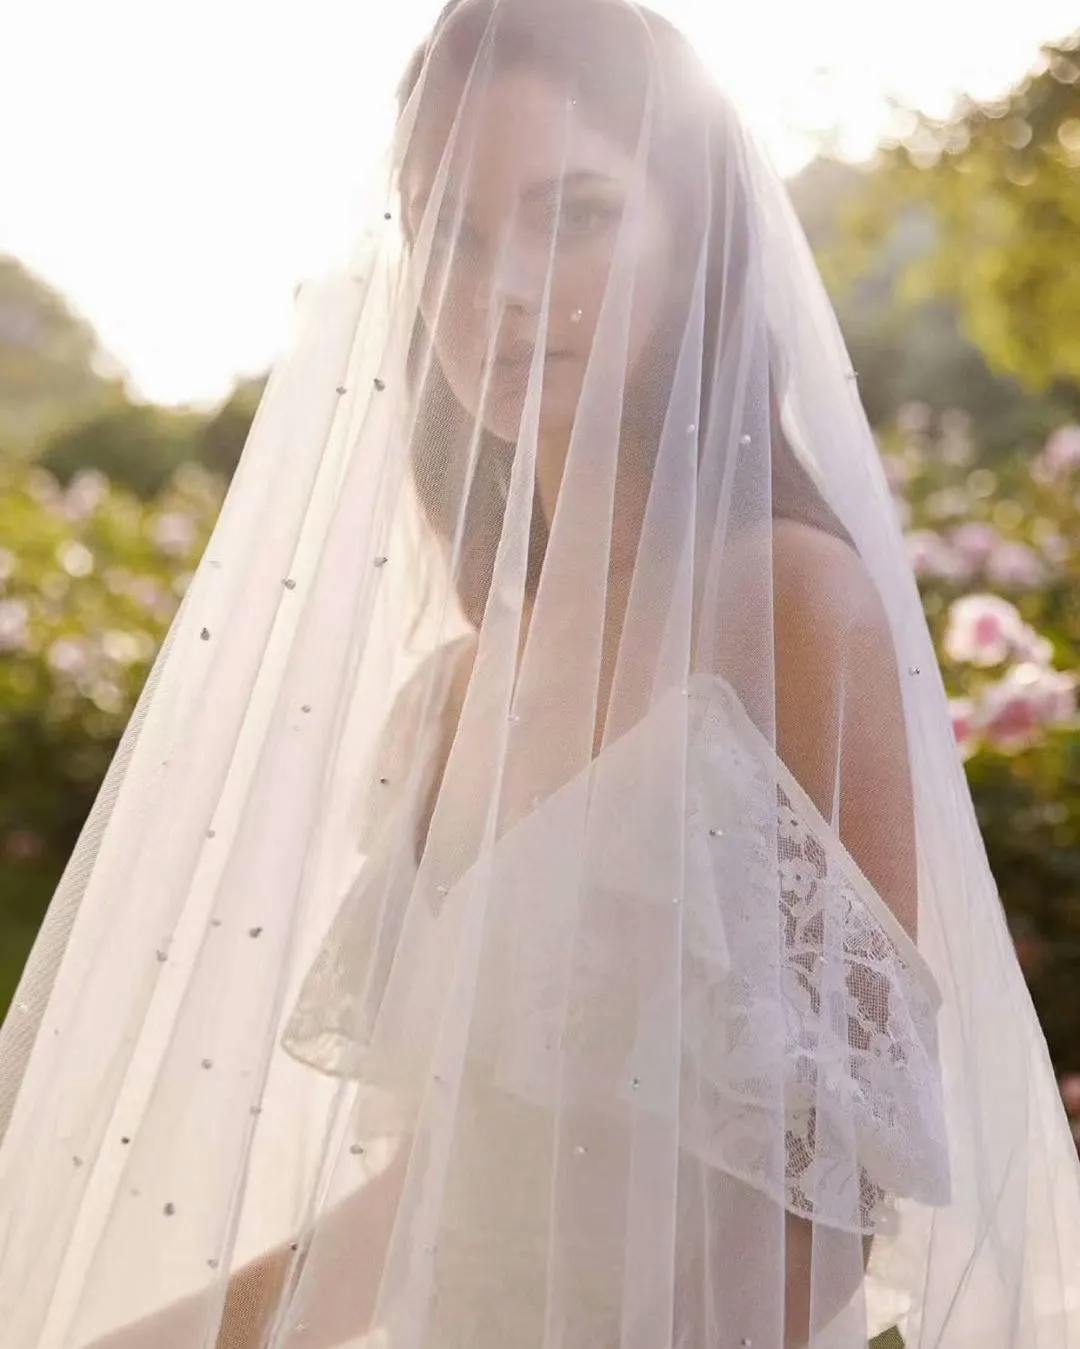 A bride stands outdoors on a sunny day, wearing a white lace wedding dress and a long, sheer veil with small embellishments. Soft sunlight filters through the veil, illuminating her face. The background features green foliage and blooming pink flowers.